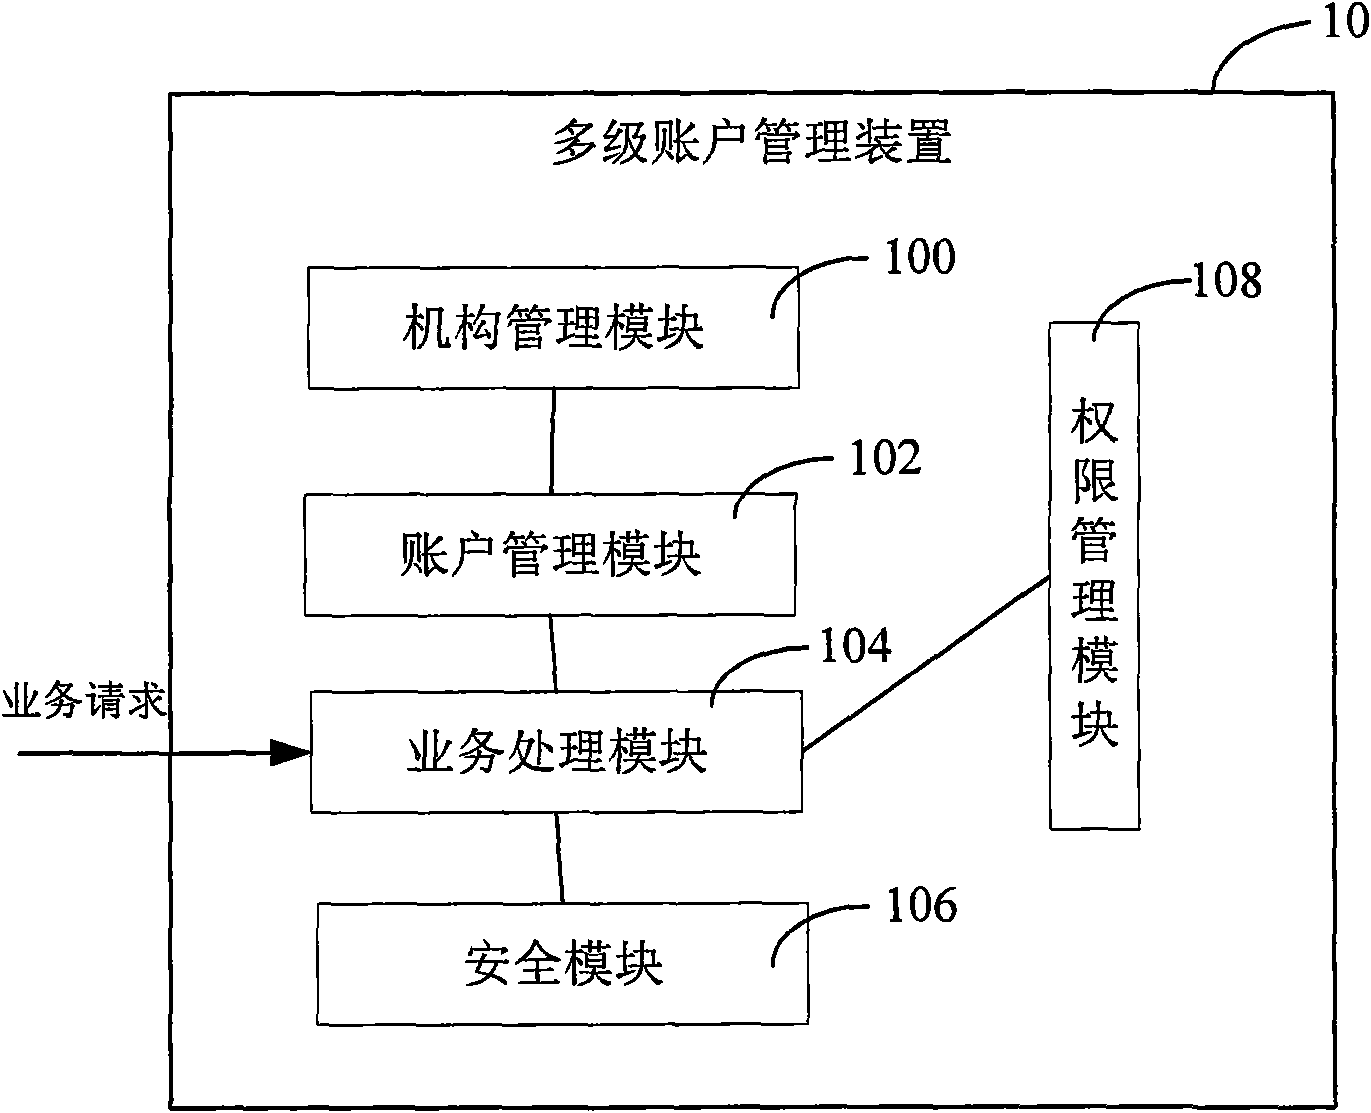 Multistage account fund management system and device